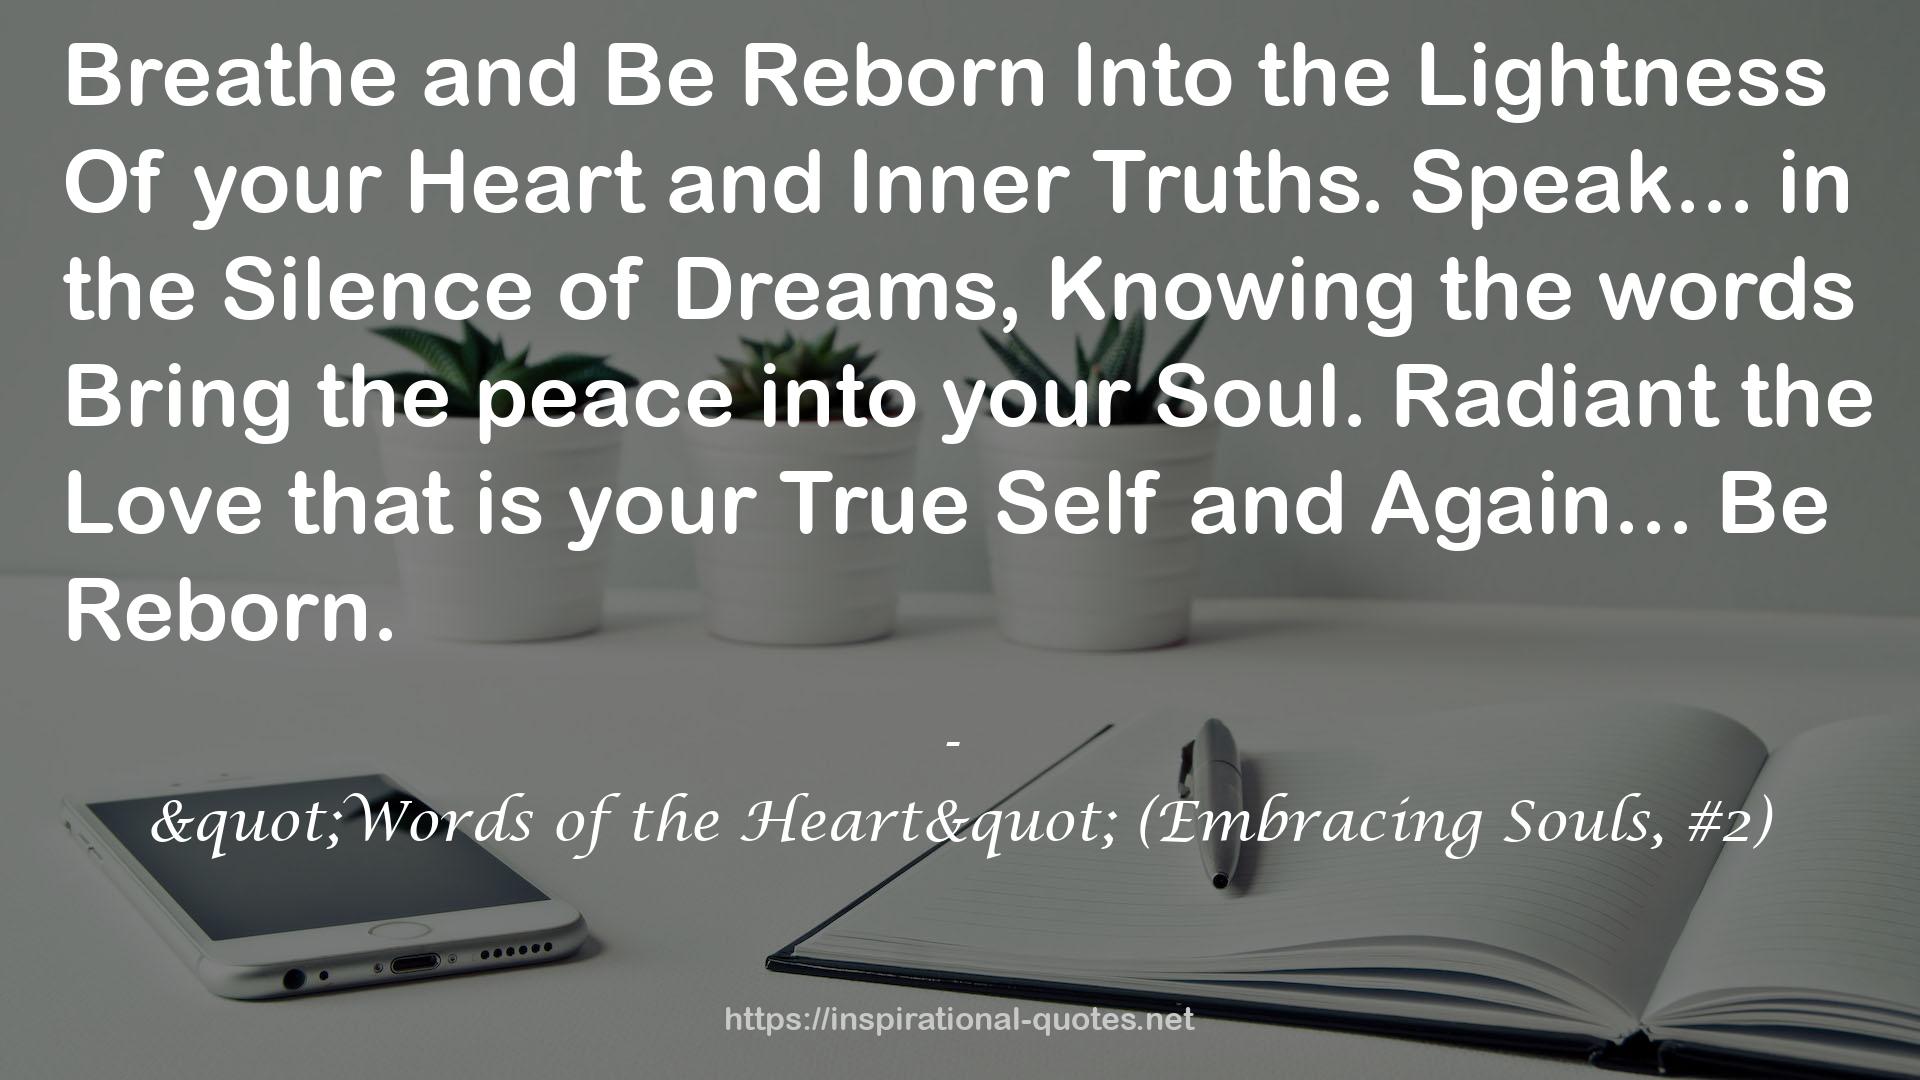 "Words of the Heart" (Embracing Souls, #2) QUOTES